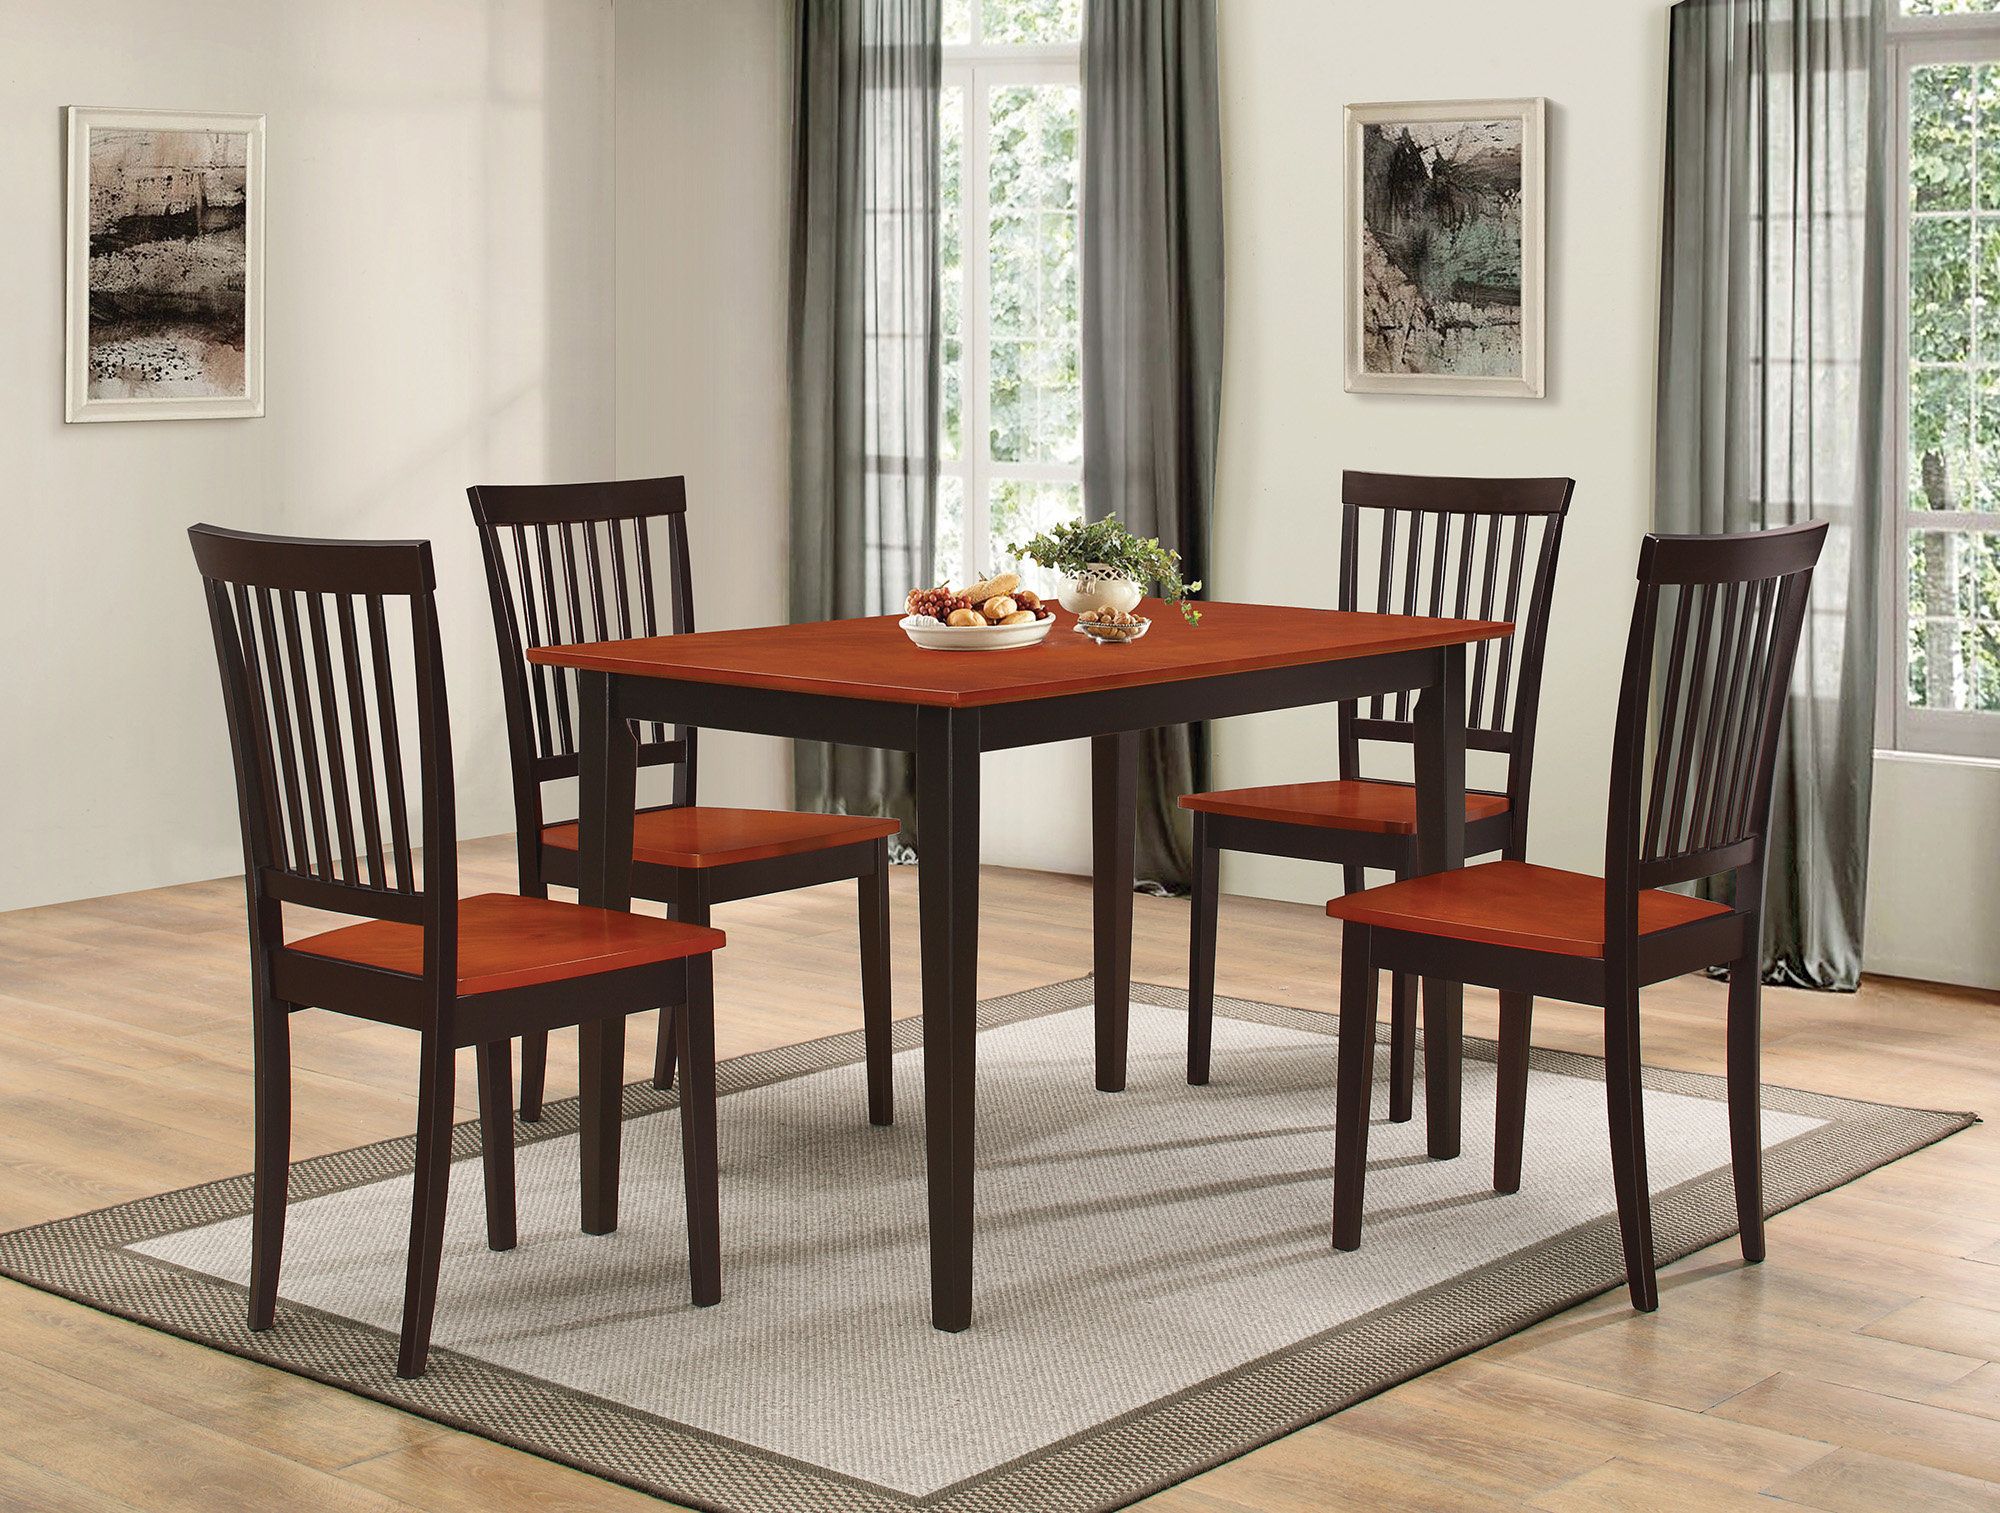 Featured Image of Pattonsburg 5 Piece Dining Sets